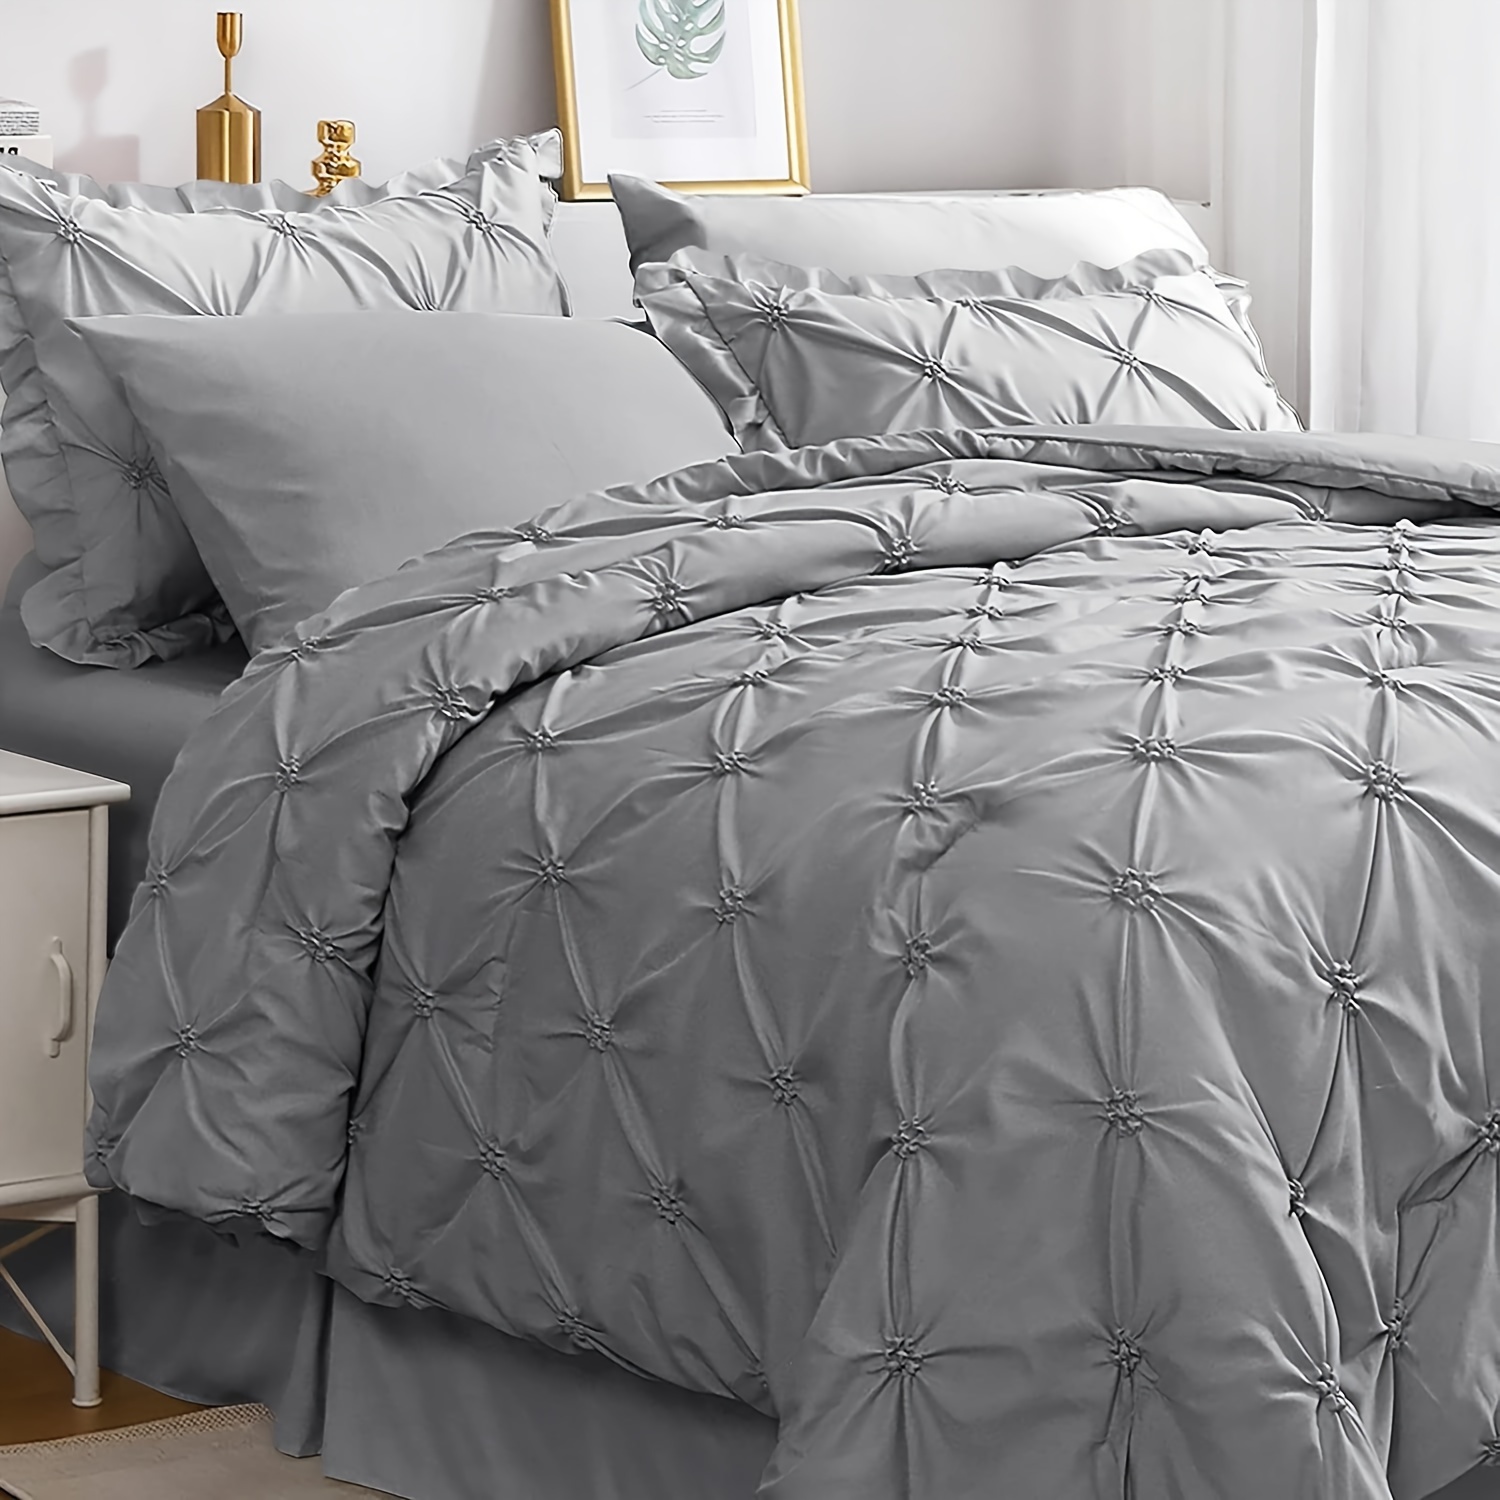 

Queen/king Size Comforter Set 7 Pieces, Pintuck Light Gray Bed In A Bag Comforter Set For Bedroom, Beddding Sets With Comforter, Sheets, Shams & Pillowcases